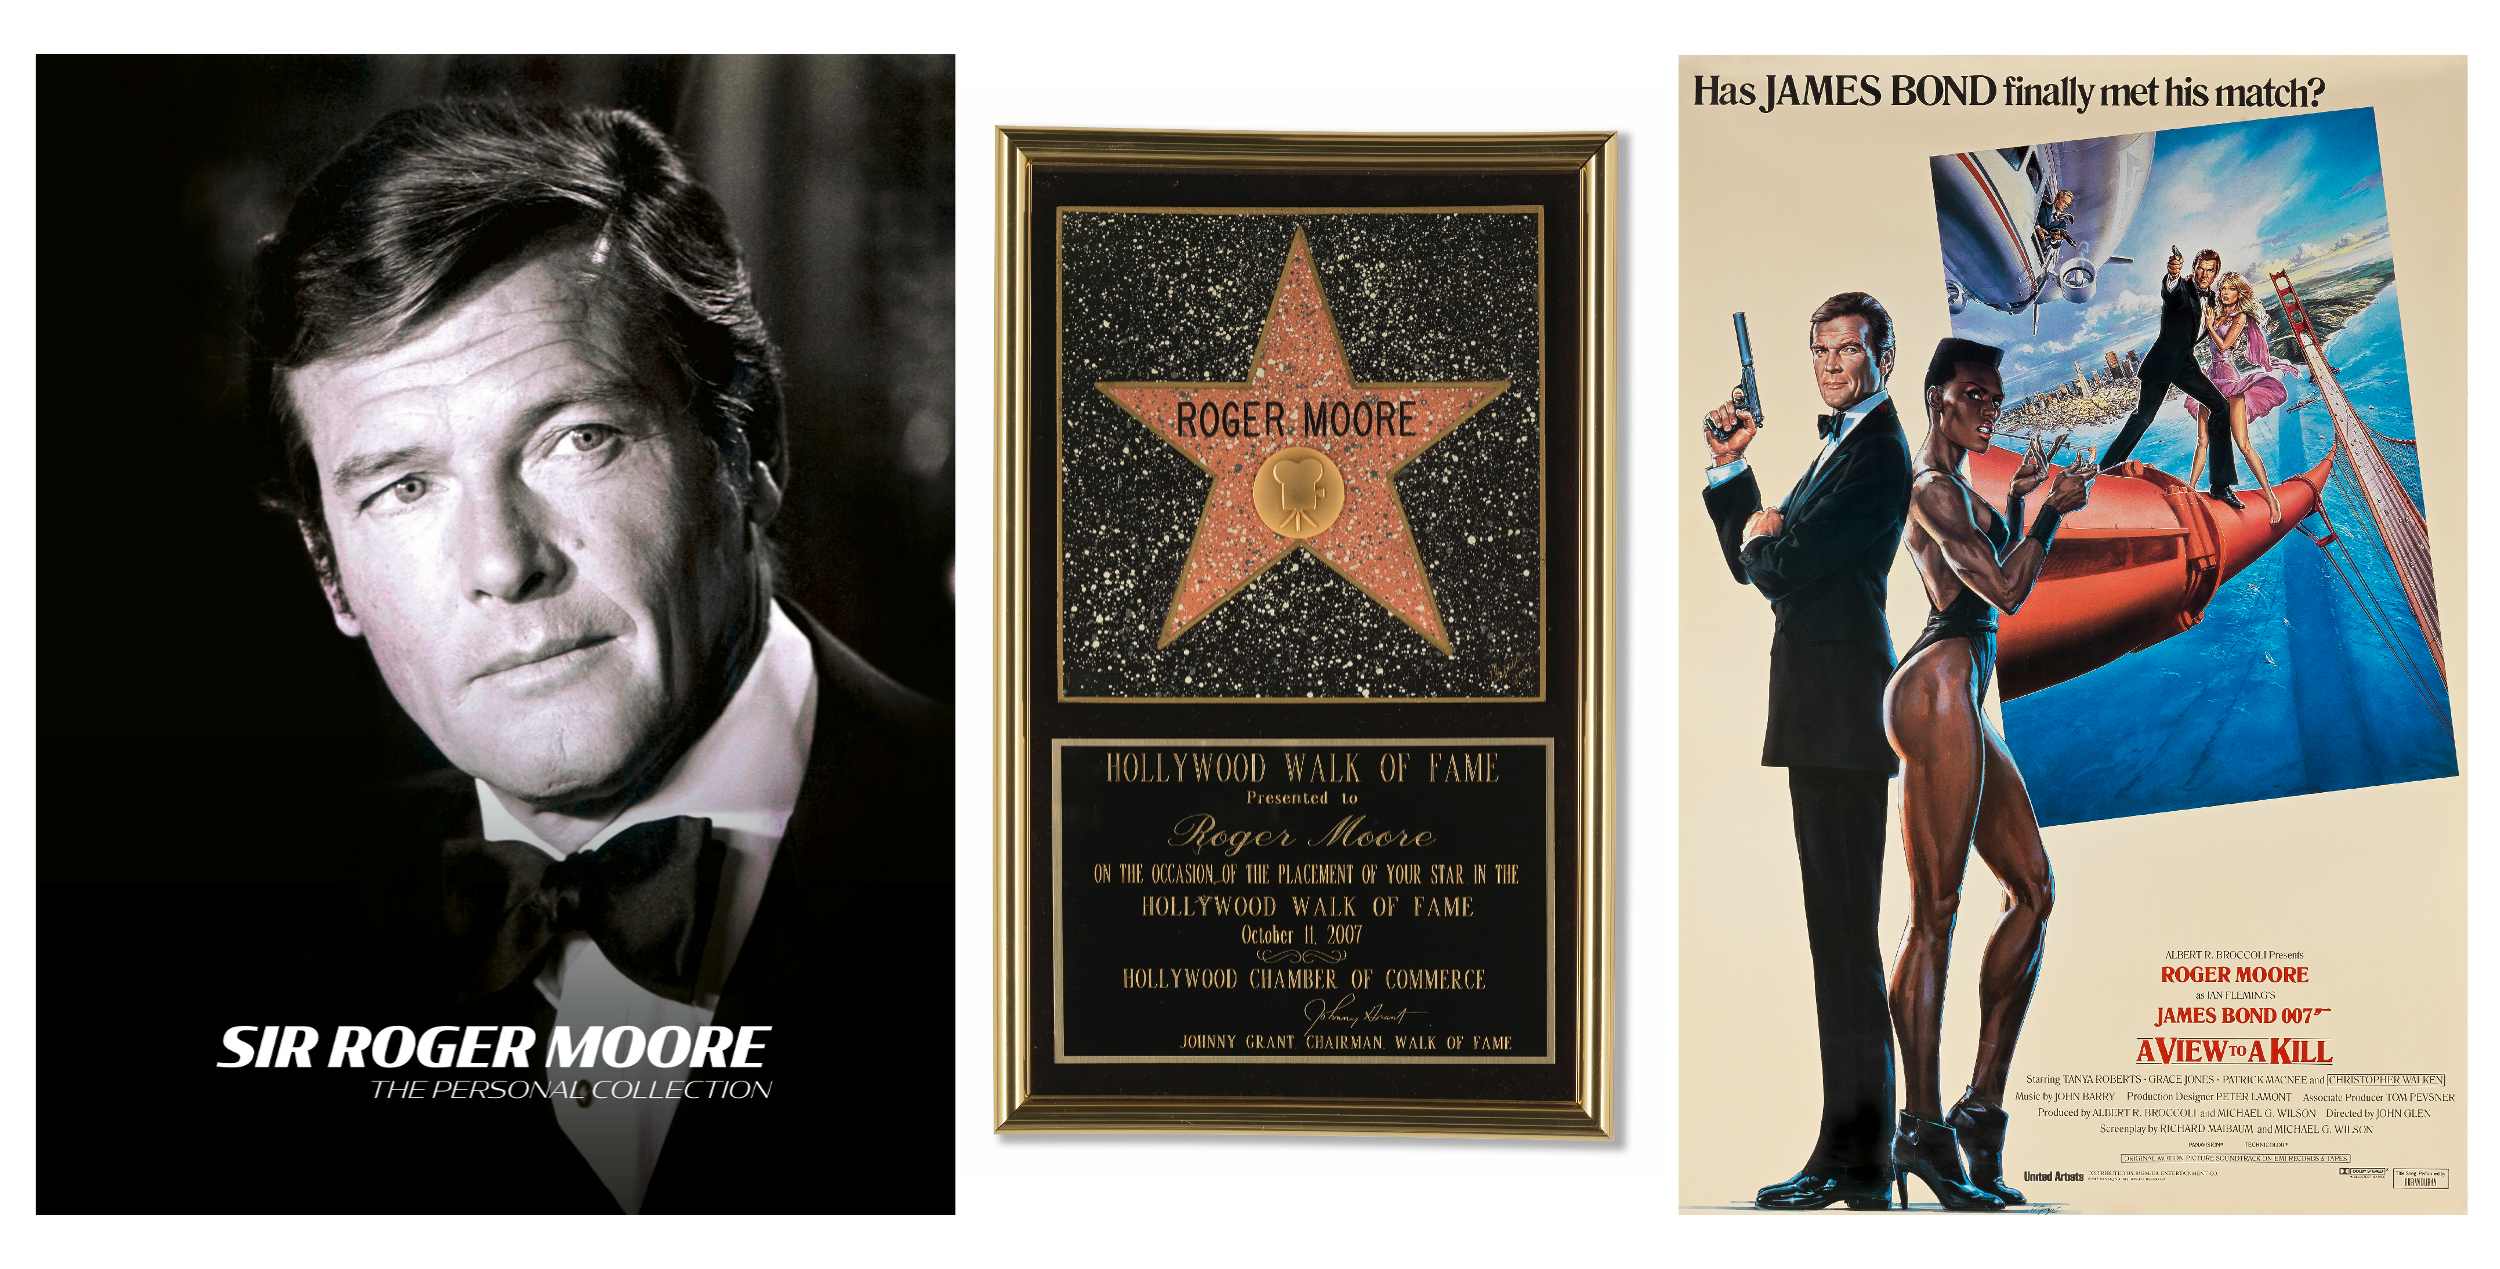 Image of Roger Moore as Bond and his walk of fame star and a poster of A view to a kill